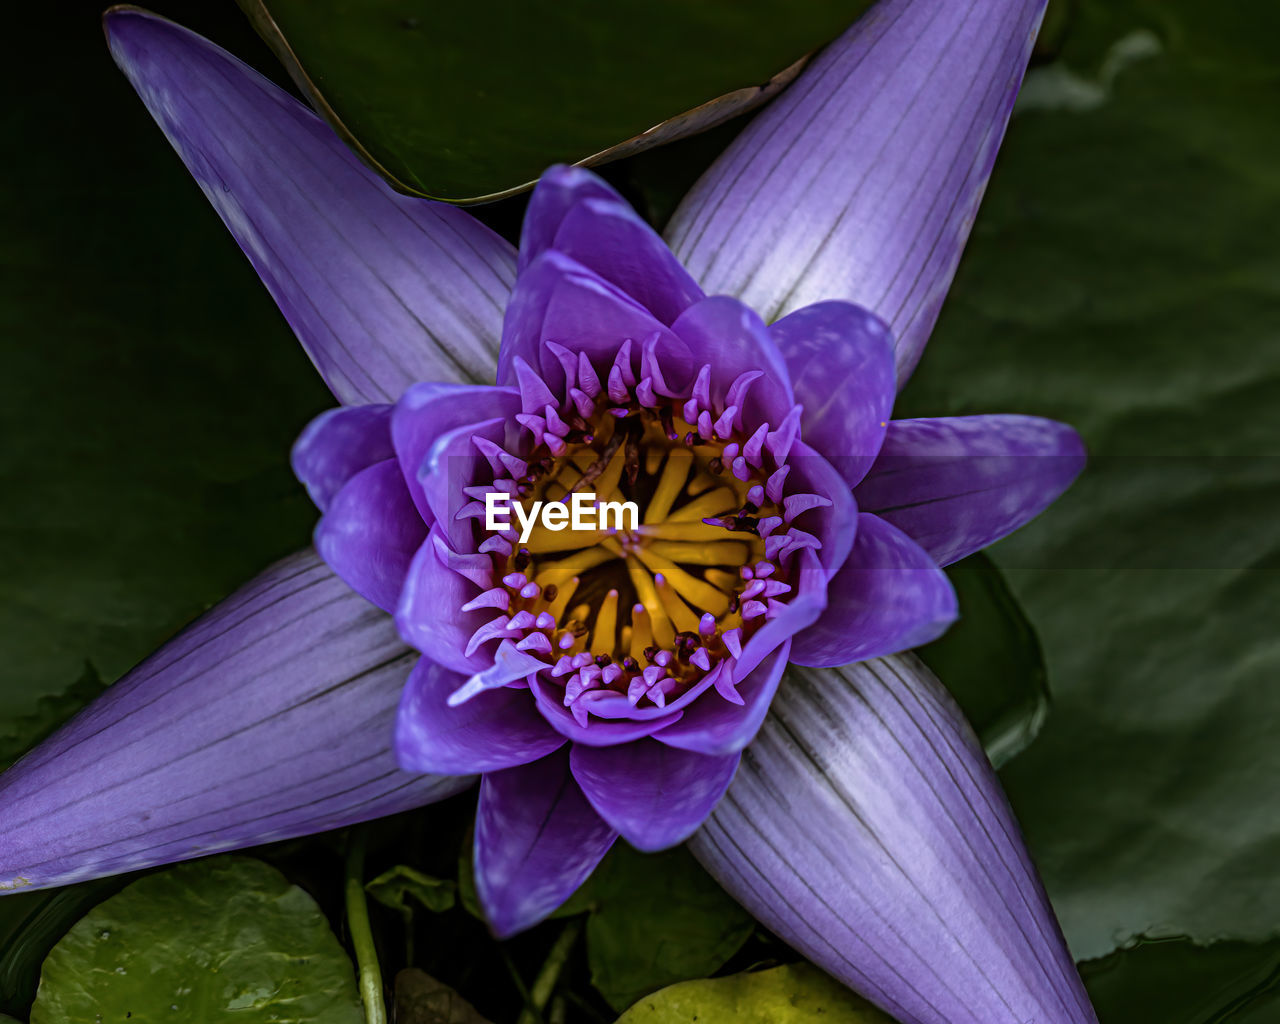 CLOSE-UP OF PURPLE LOTUS WATER LILY IN GARDEN